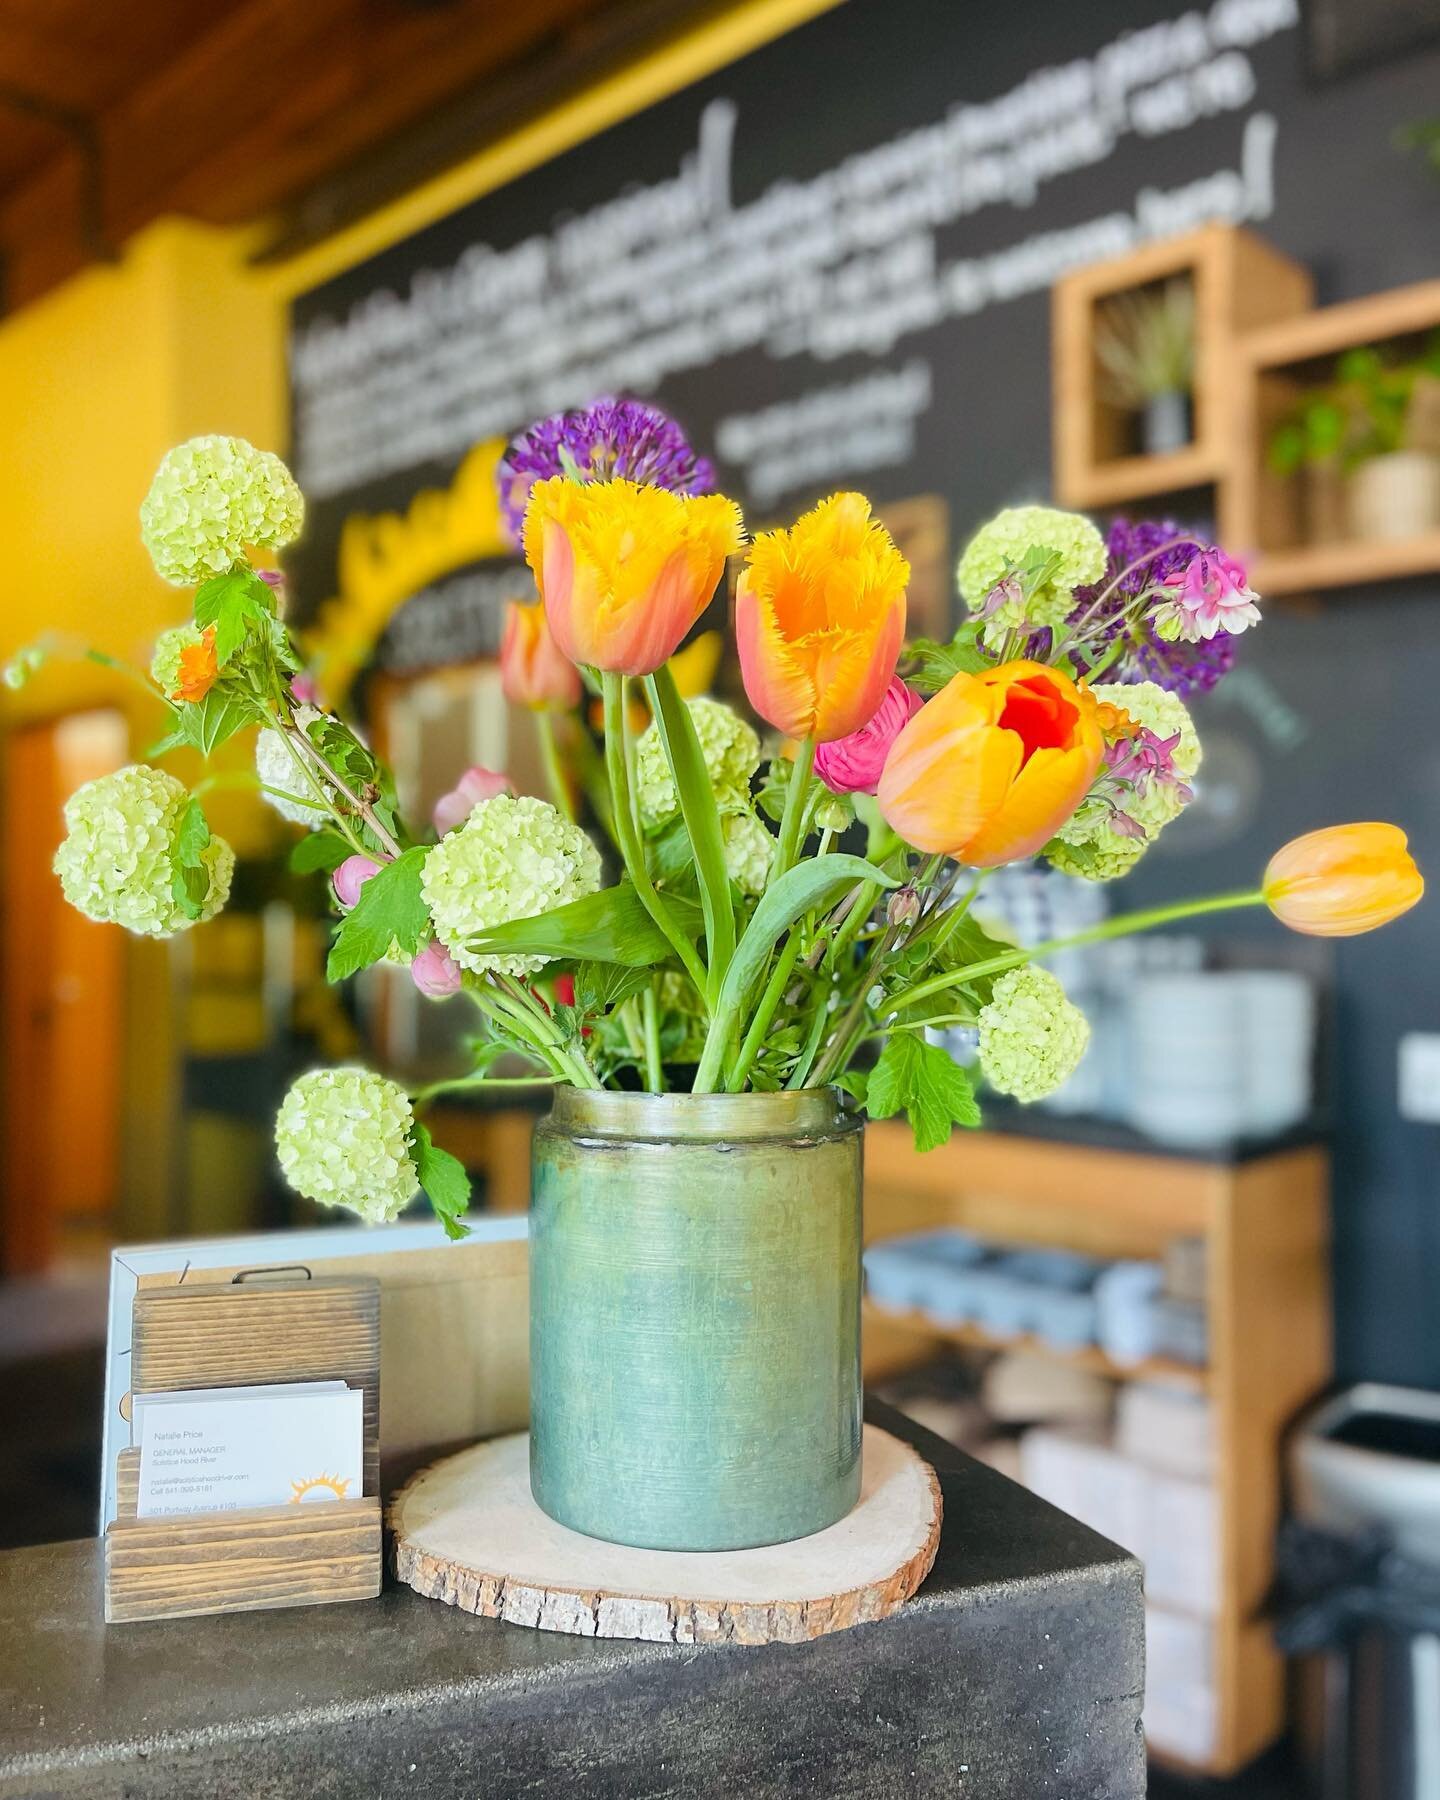 We&rsquo;ve got a few special surprises just in time for the weekend, stay tuned for some menu special and operational updates&hellip;

In the meantime, here&rsquo;s some spring flowers to pair with some expected spring showers coming thru this weeke